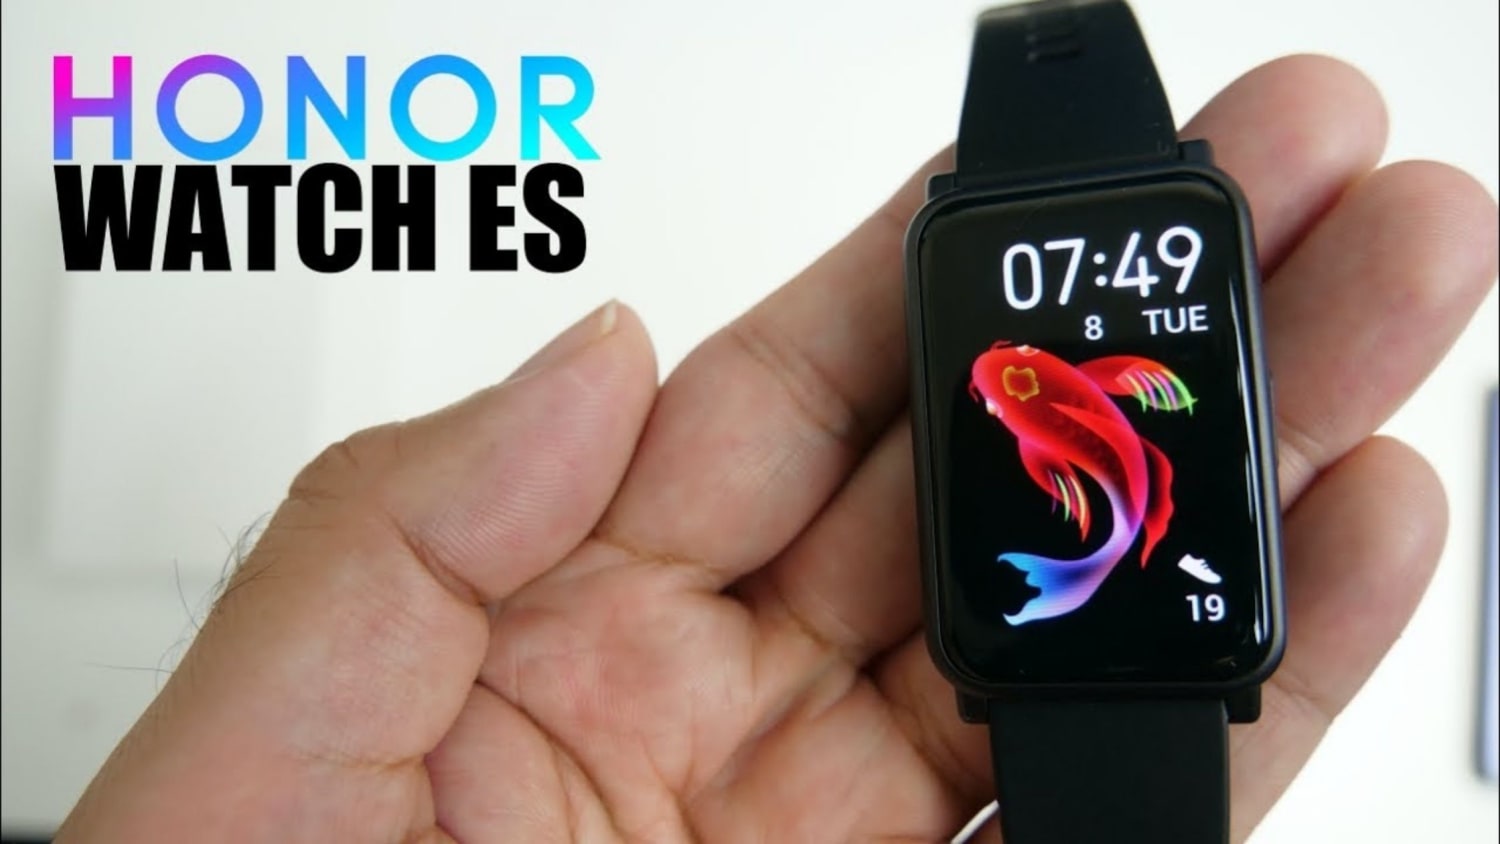 Honor Smartwatch es First Impression of Wearable in 2020